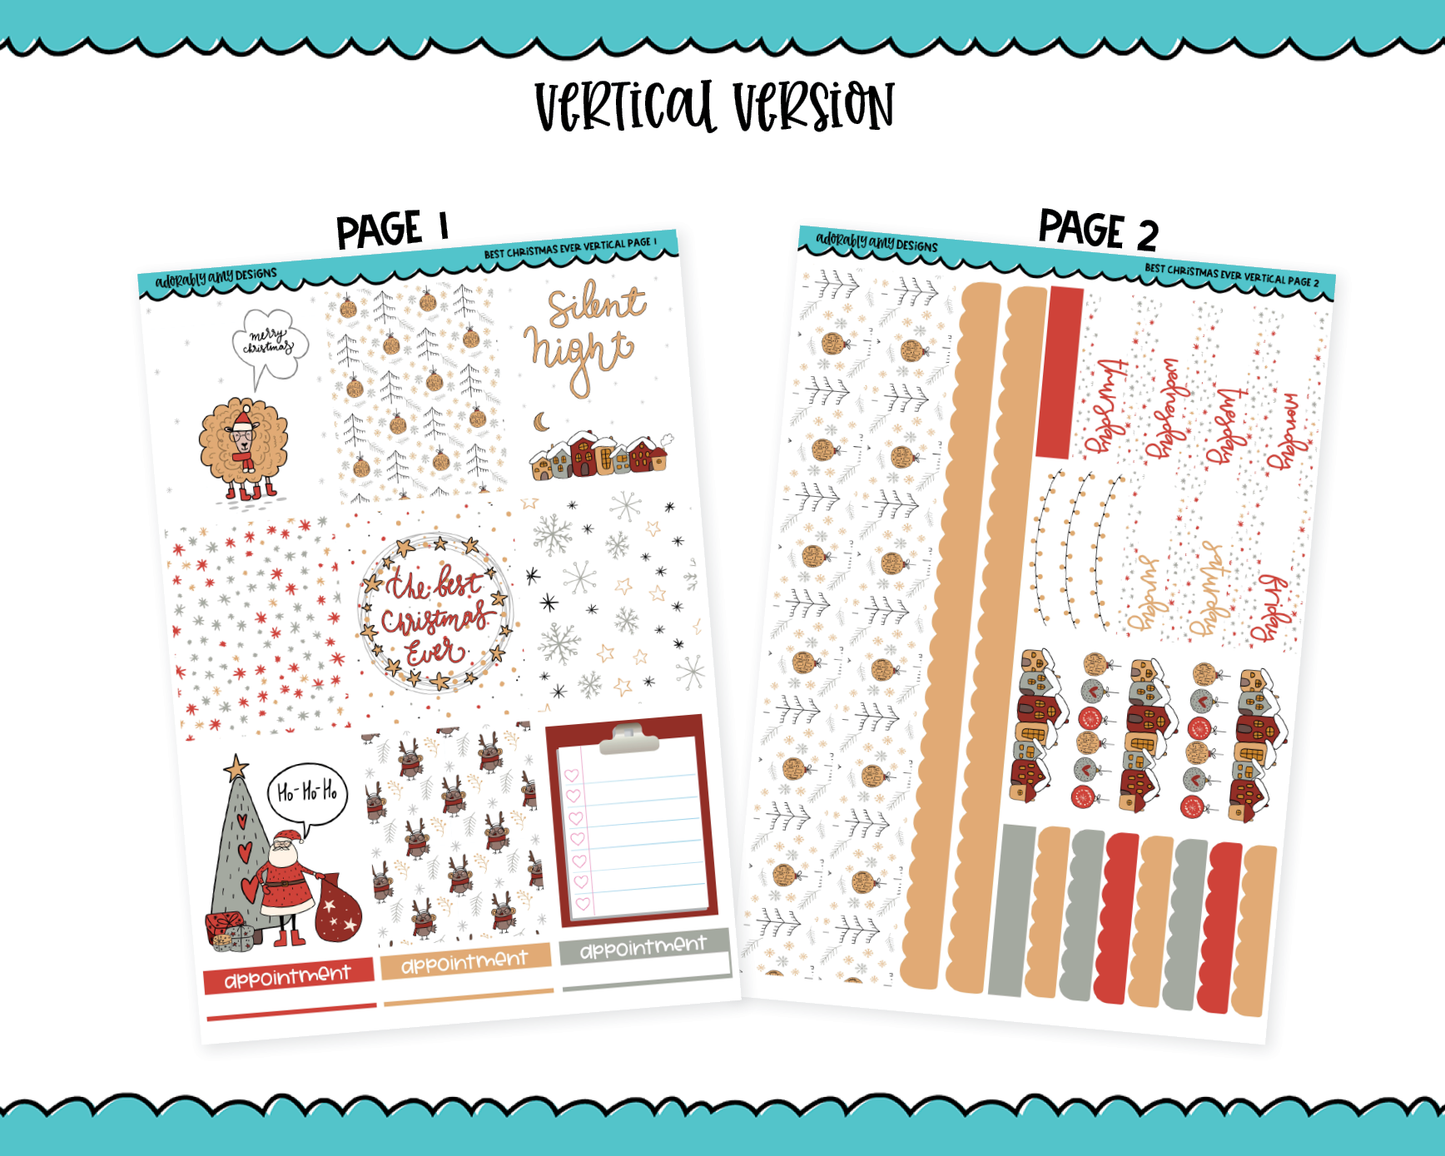 Vertical Best Christmas Ever Holiday Themed Planner Sticker Kit for Vertical Standard Size Planners or Inserts